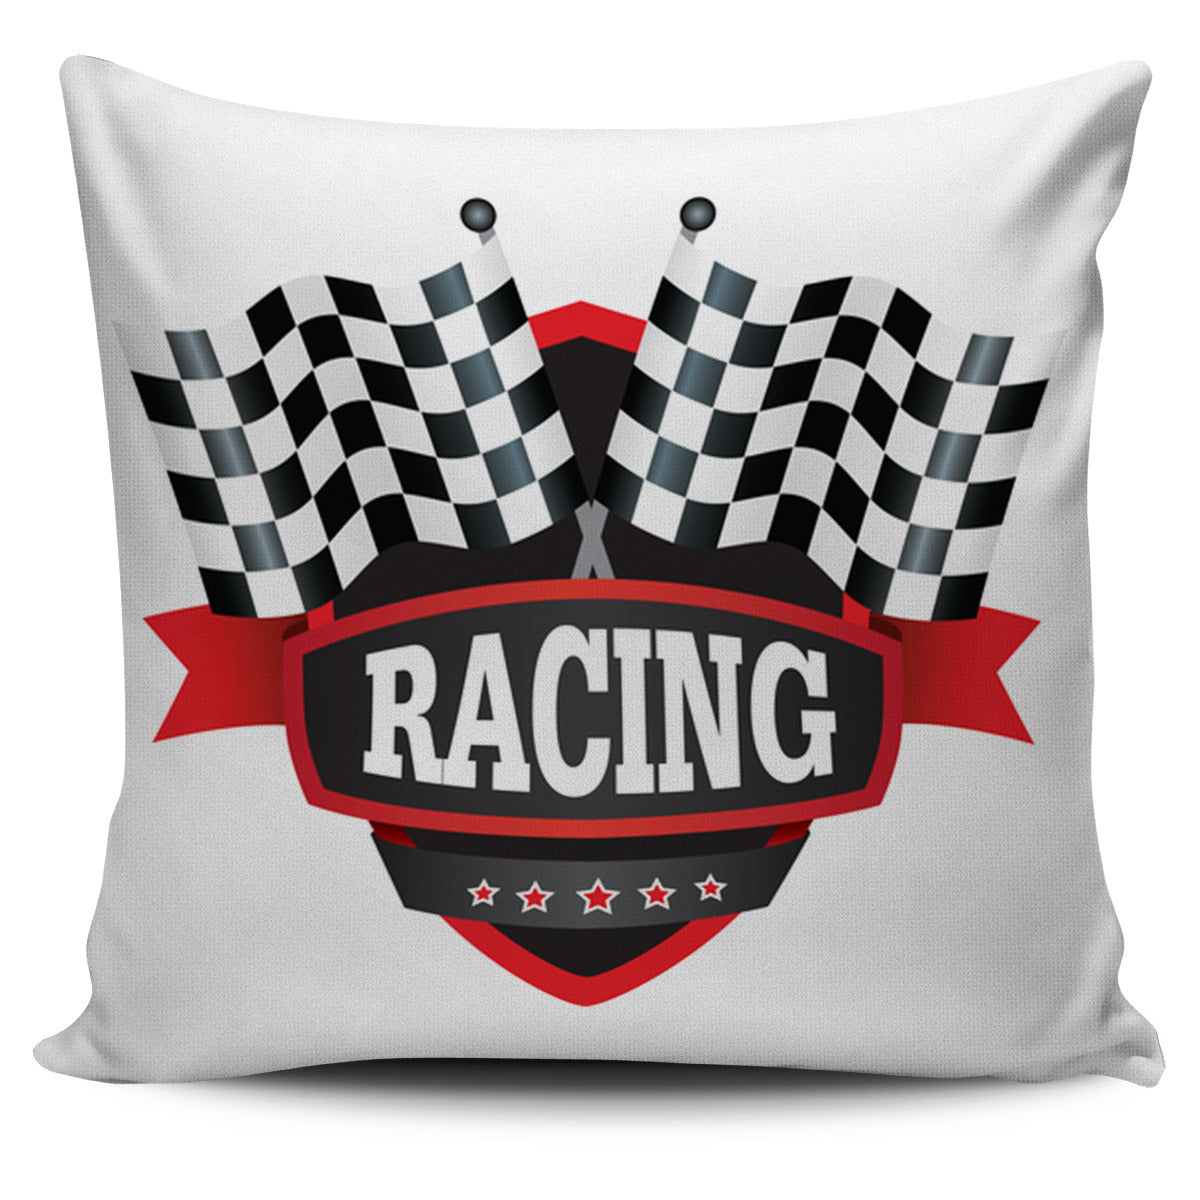 Racing Pillow Cover V14